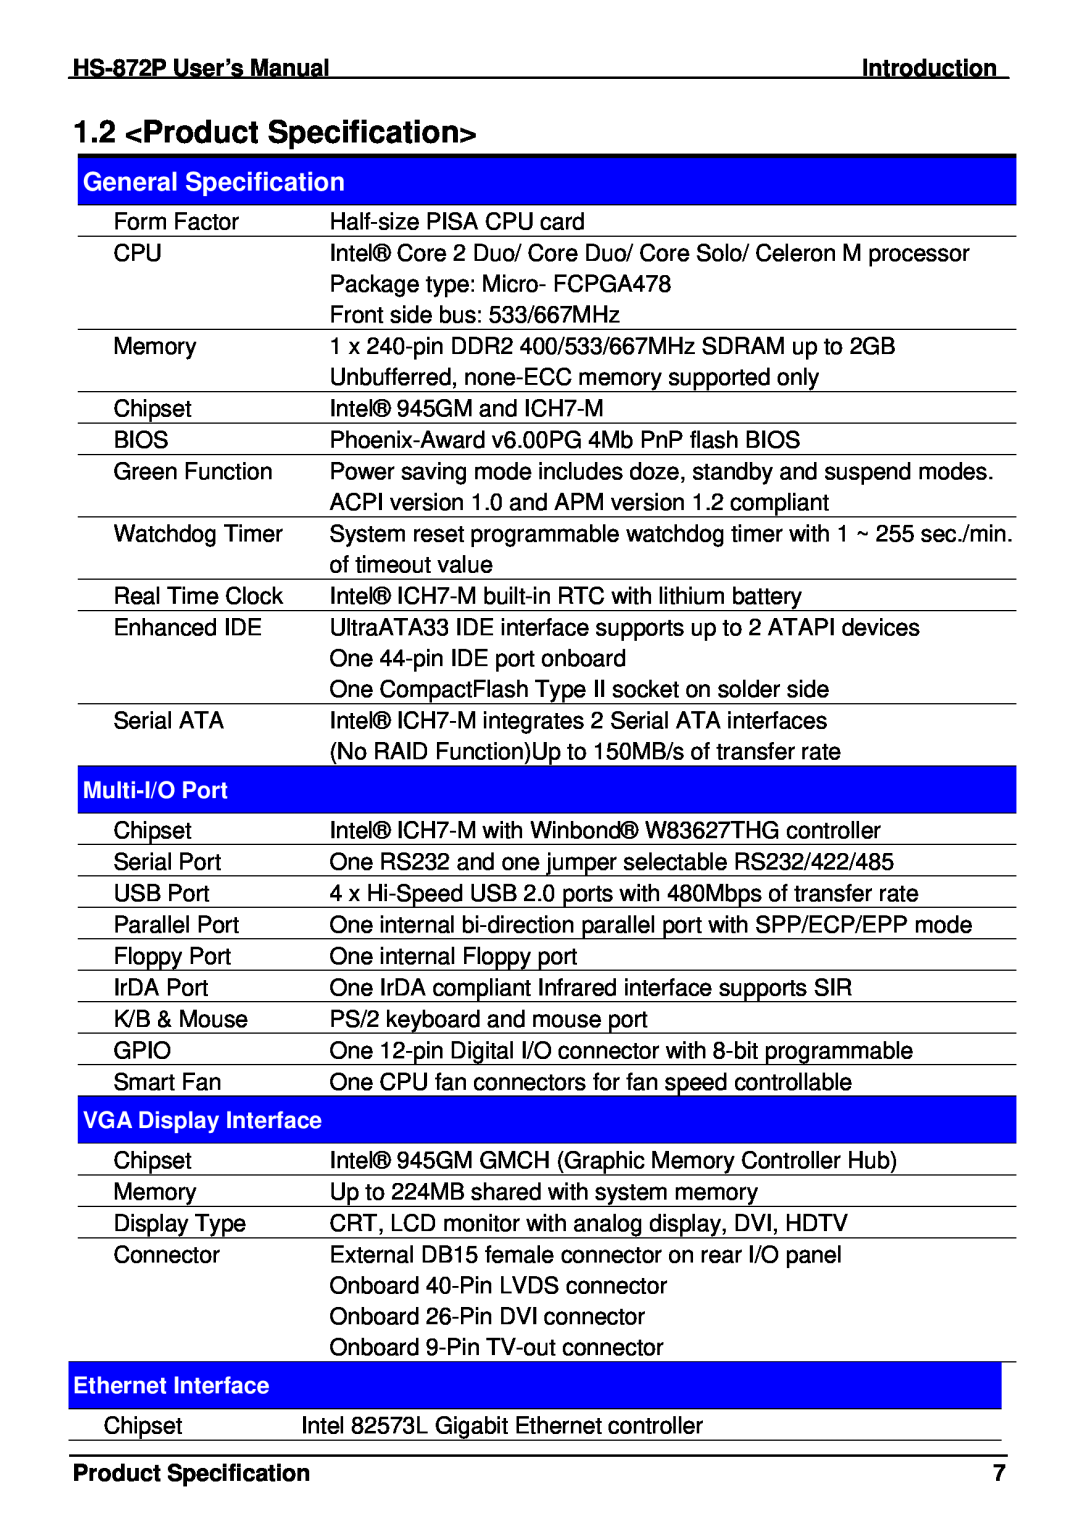 Intel half-size single board computer Product Specification, General Specification, Multi-I/O Port, VGA Display Interface 